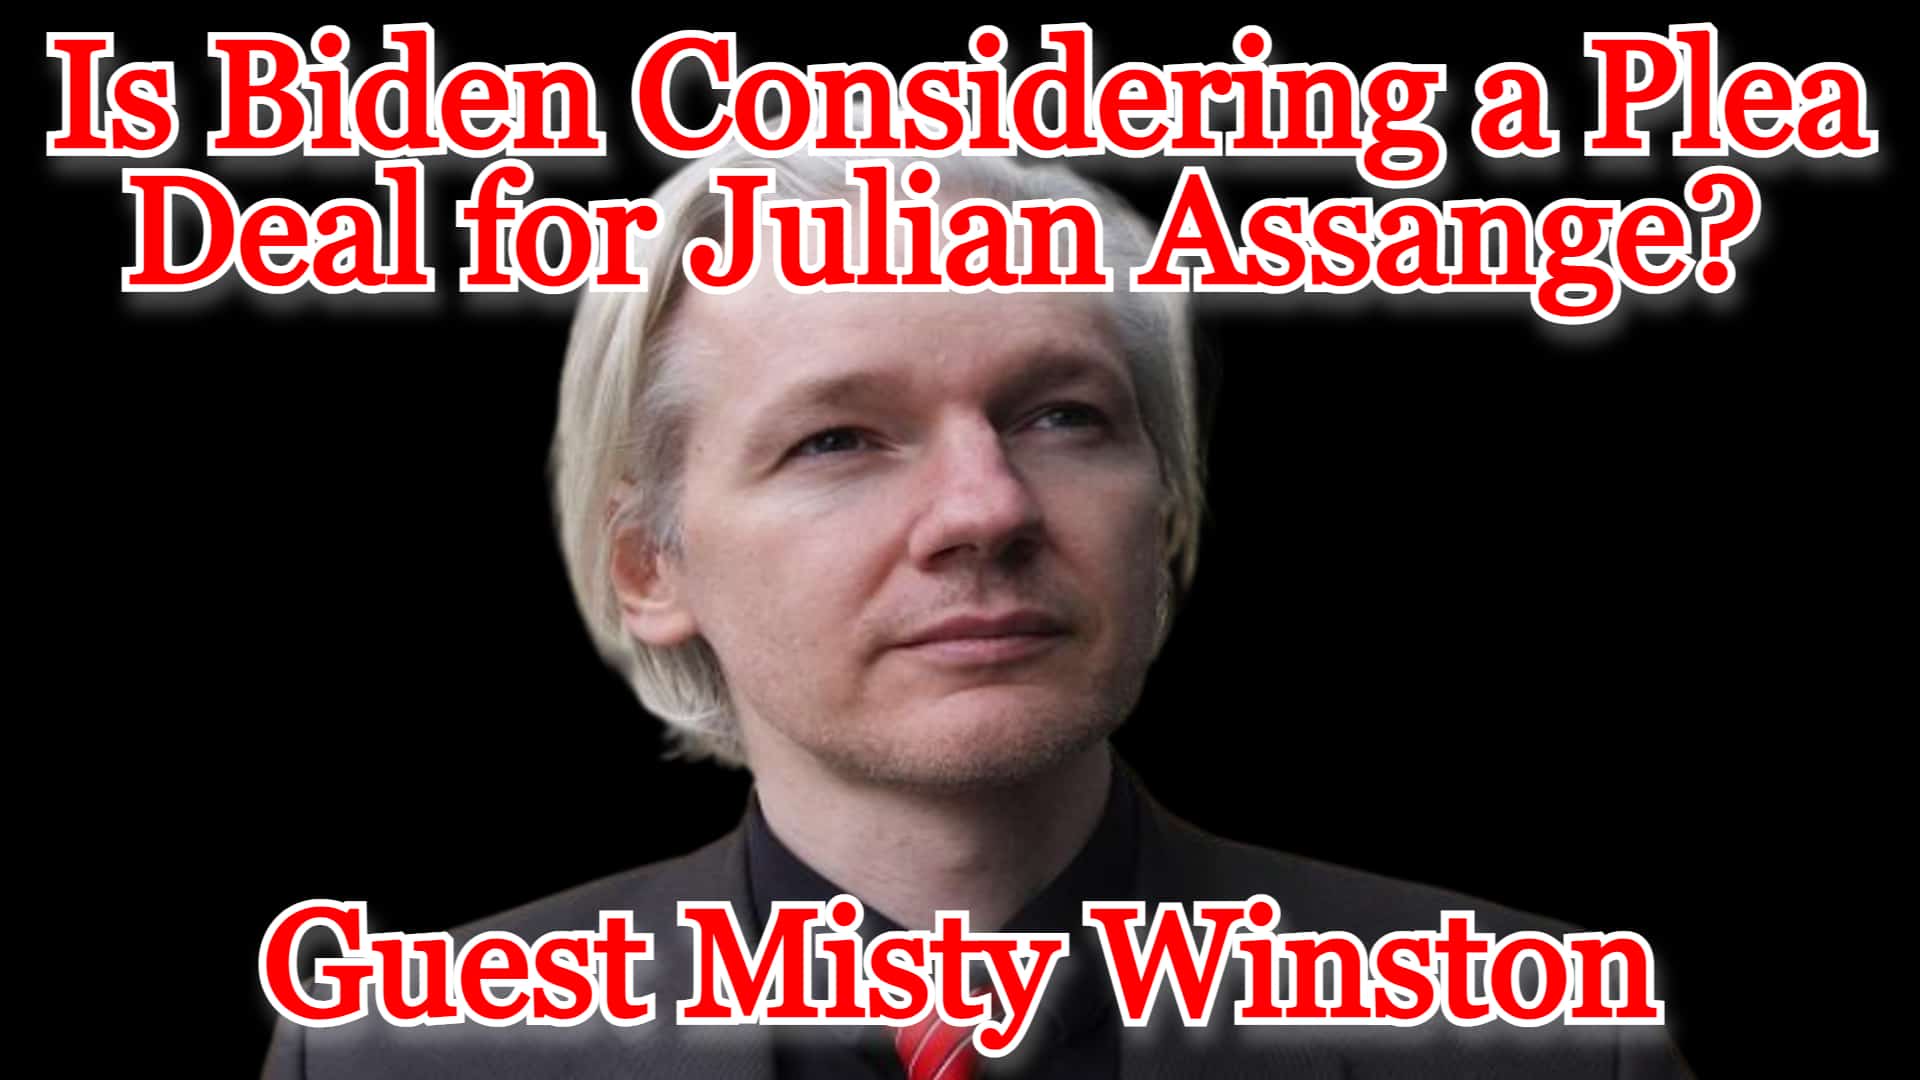 COI #459: Is the White House Considering a Plea Deal for Julian Assange? guest Misty Winston